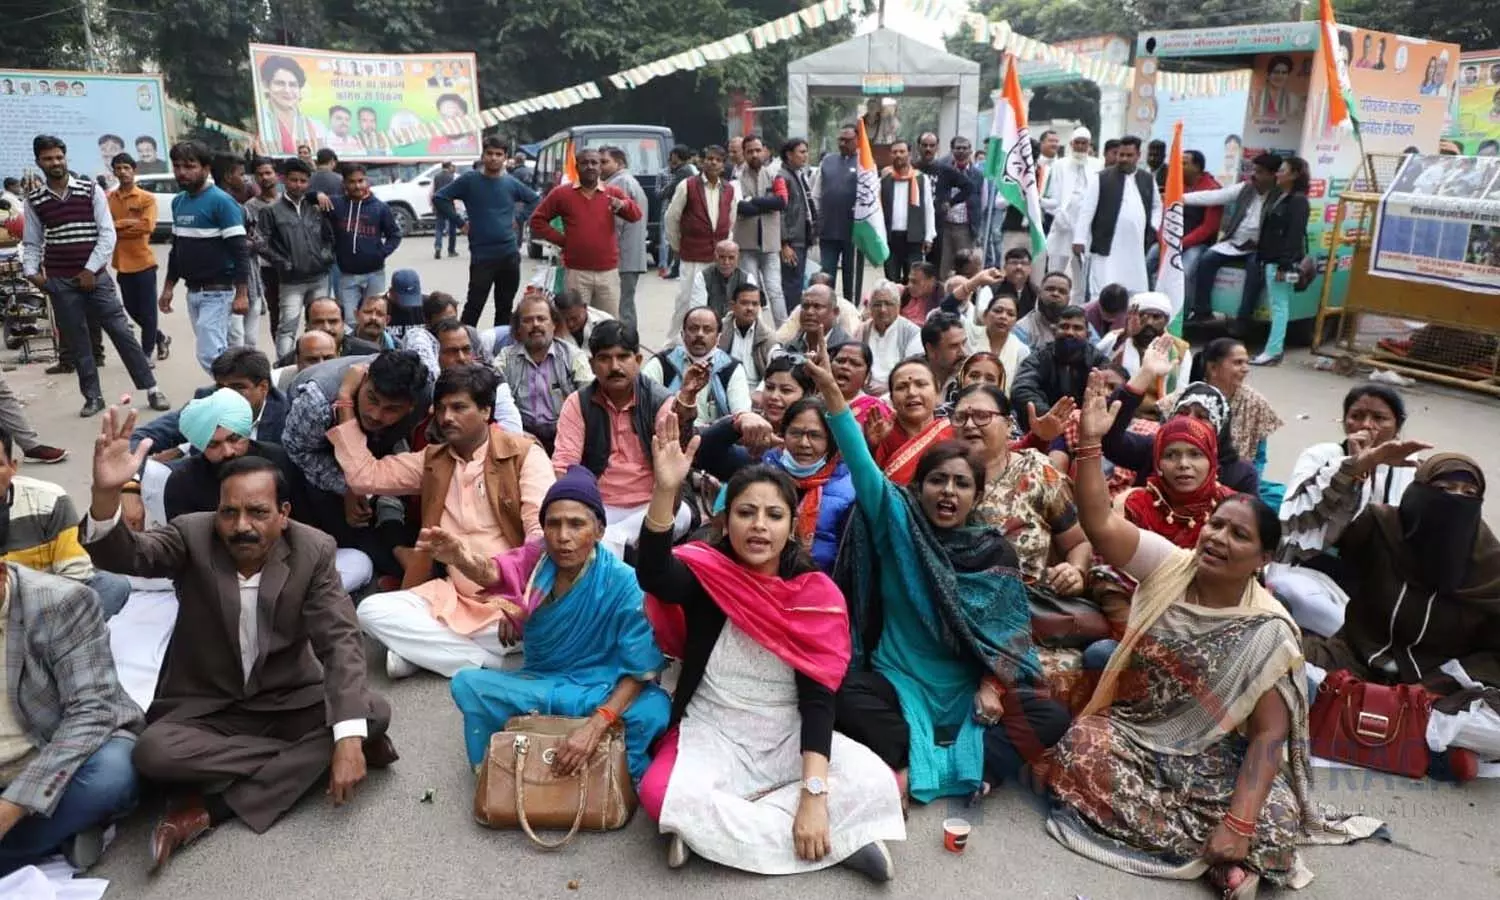 Lucknow News: Congress workers sitting on dharna demanding the dismissal of Minister of State for Home Ajay Mishra Teni